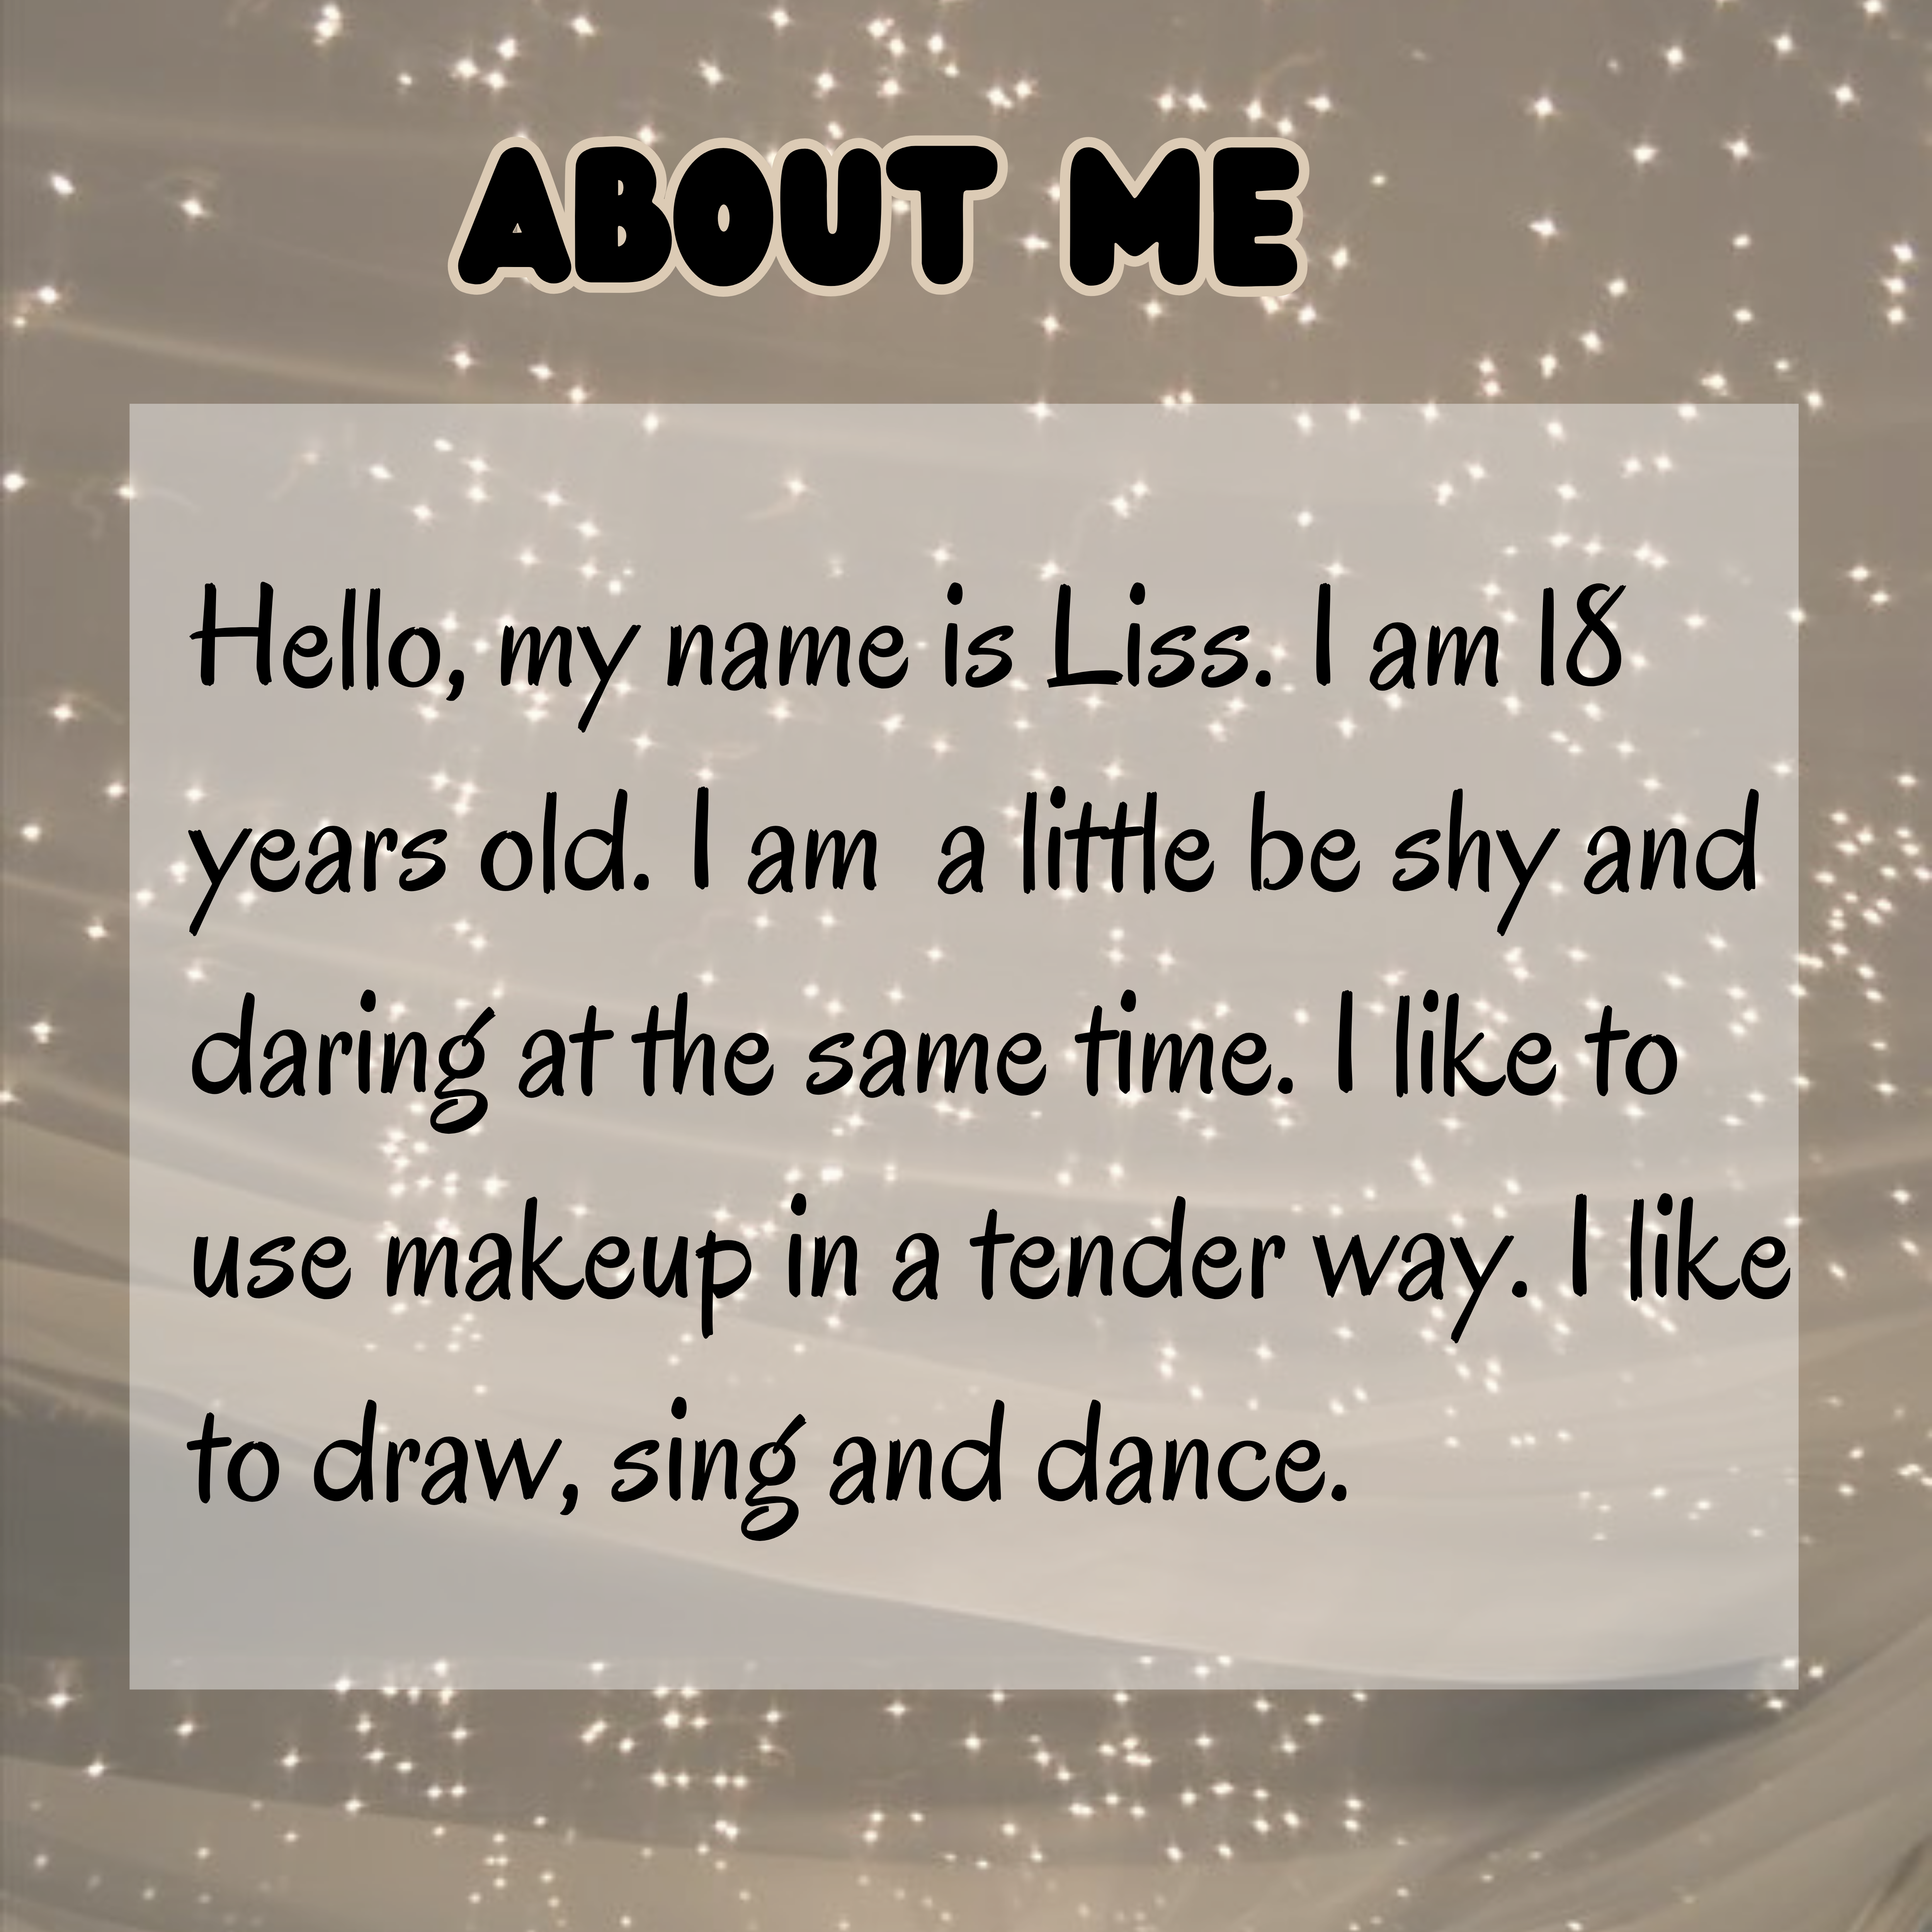 -liss05 about me image: 1